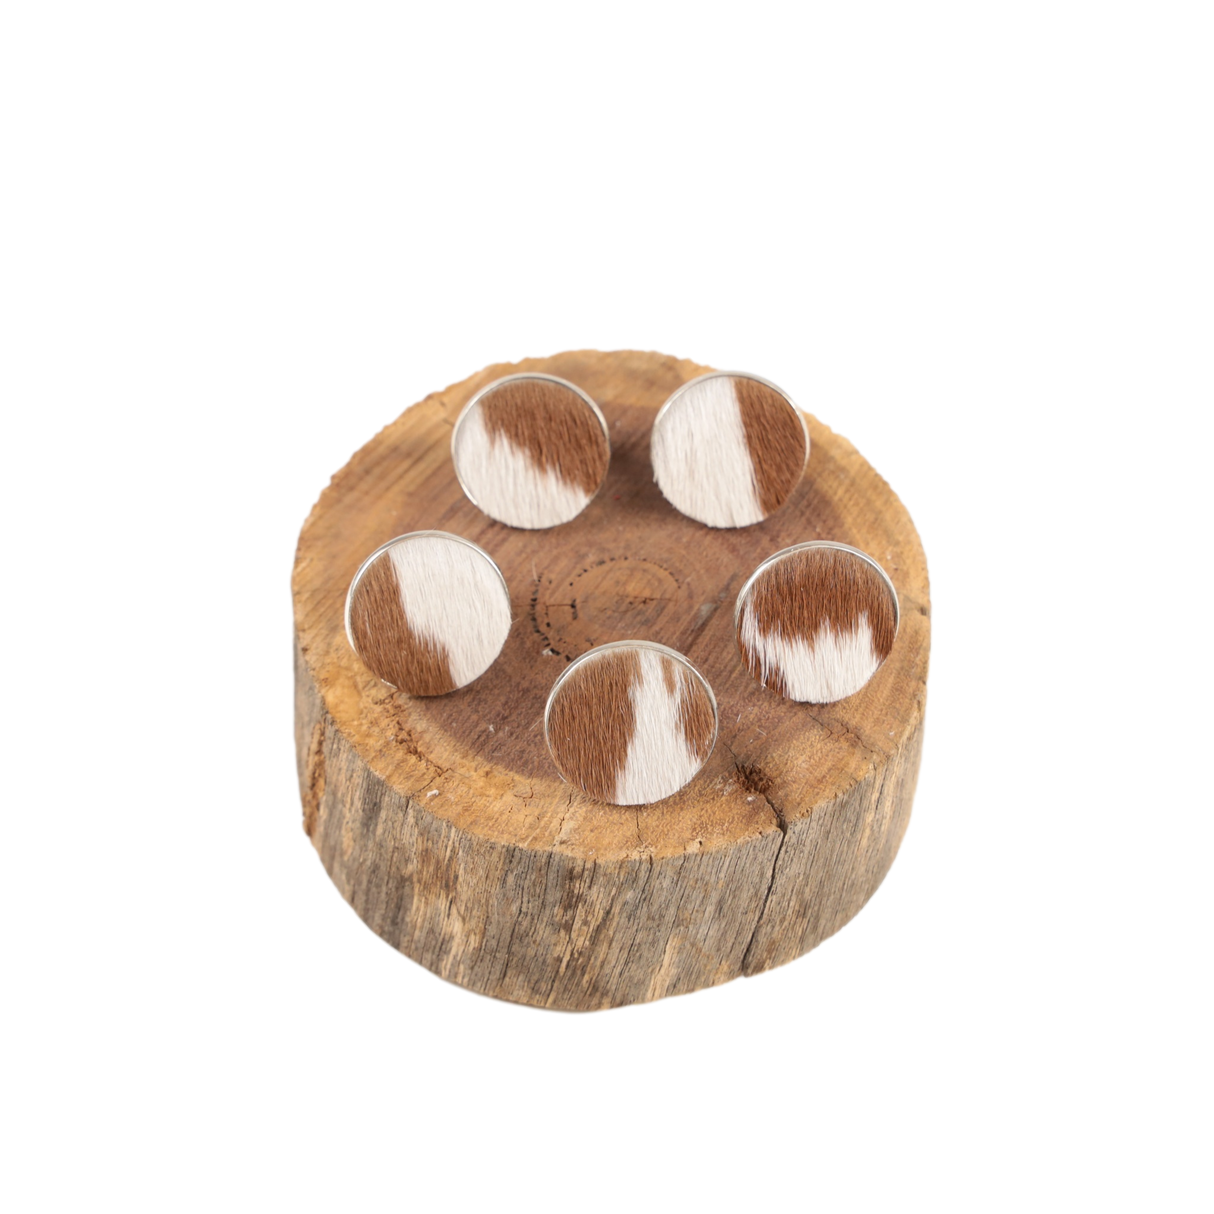 Cowhide Ring - Tan/White Patch